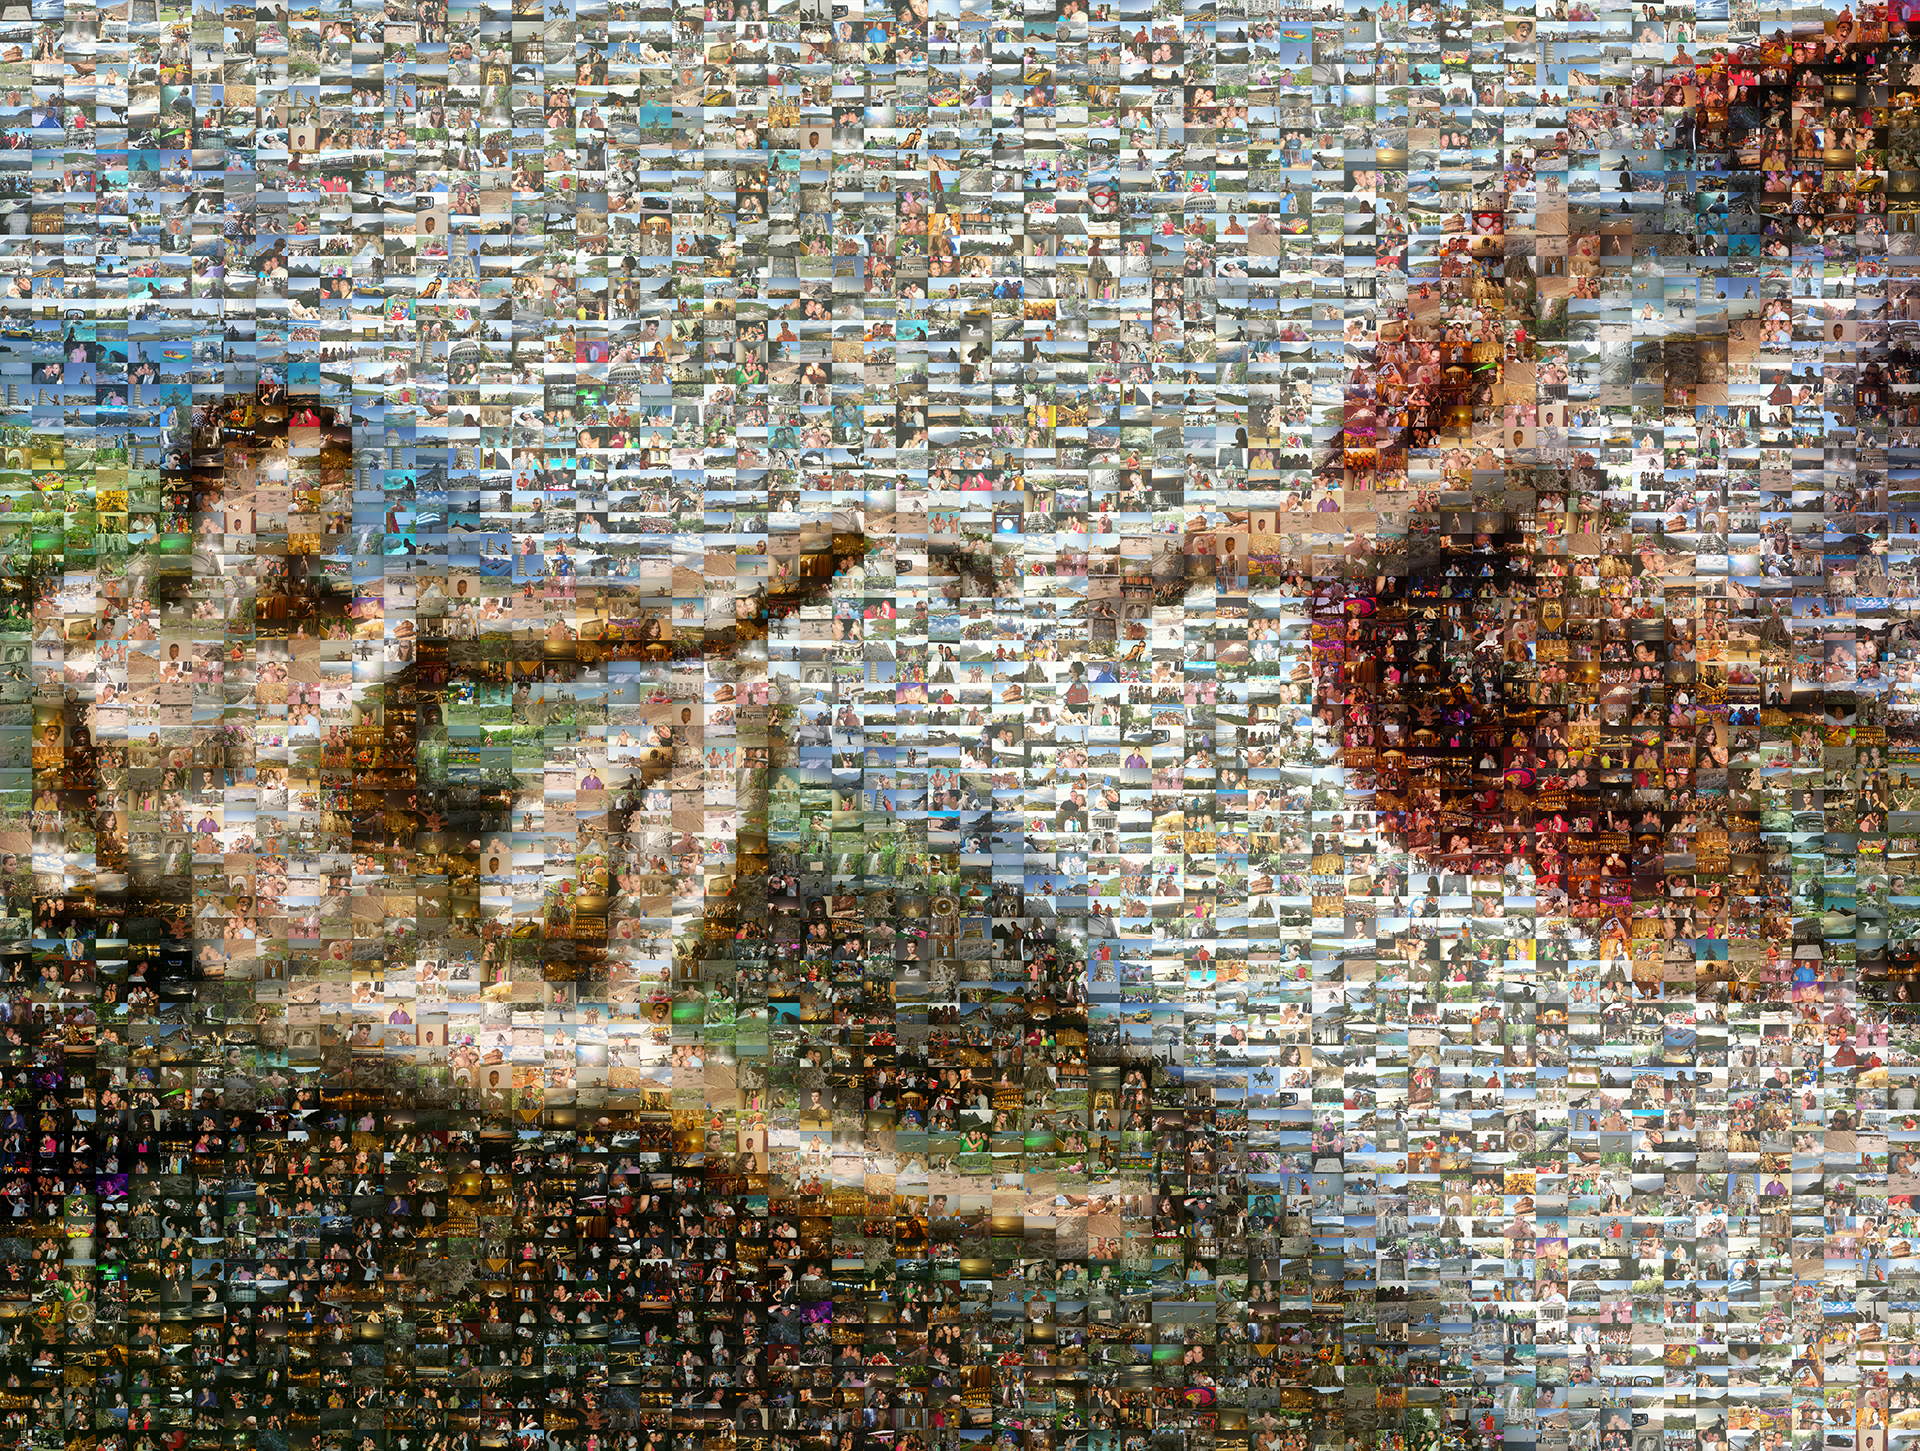 photo mosaic created the famous part of the Sistine Chapel using 1,235 vacation photos